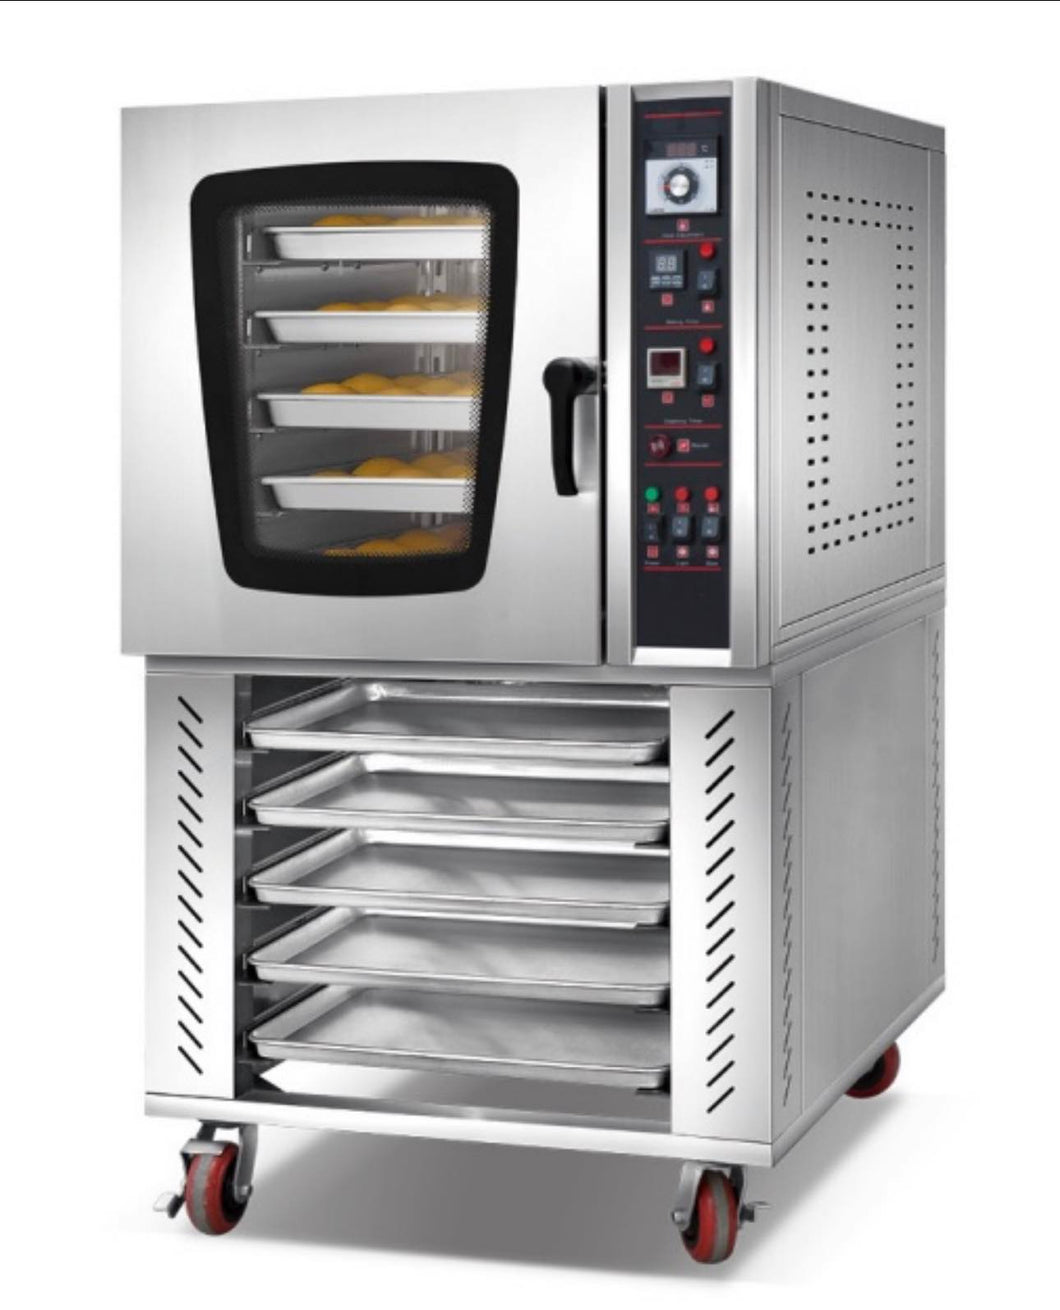 5 Tray Gas Convection Oven with Shelf